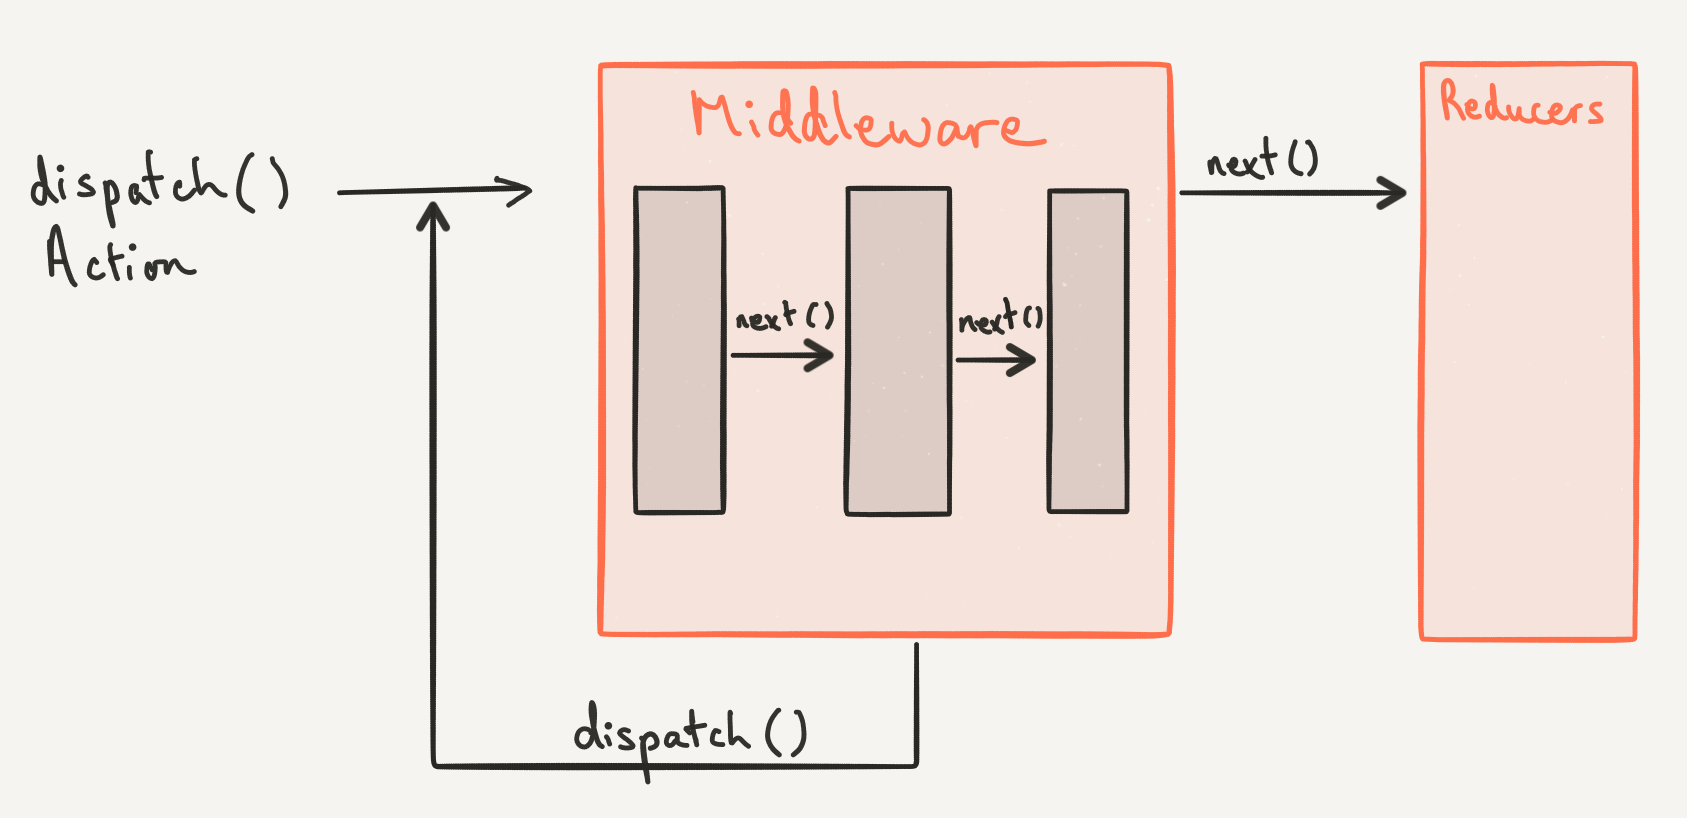 This is what the Redux middleware flow looks like